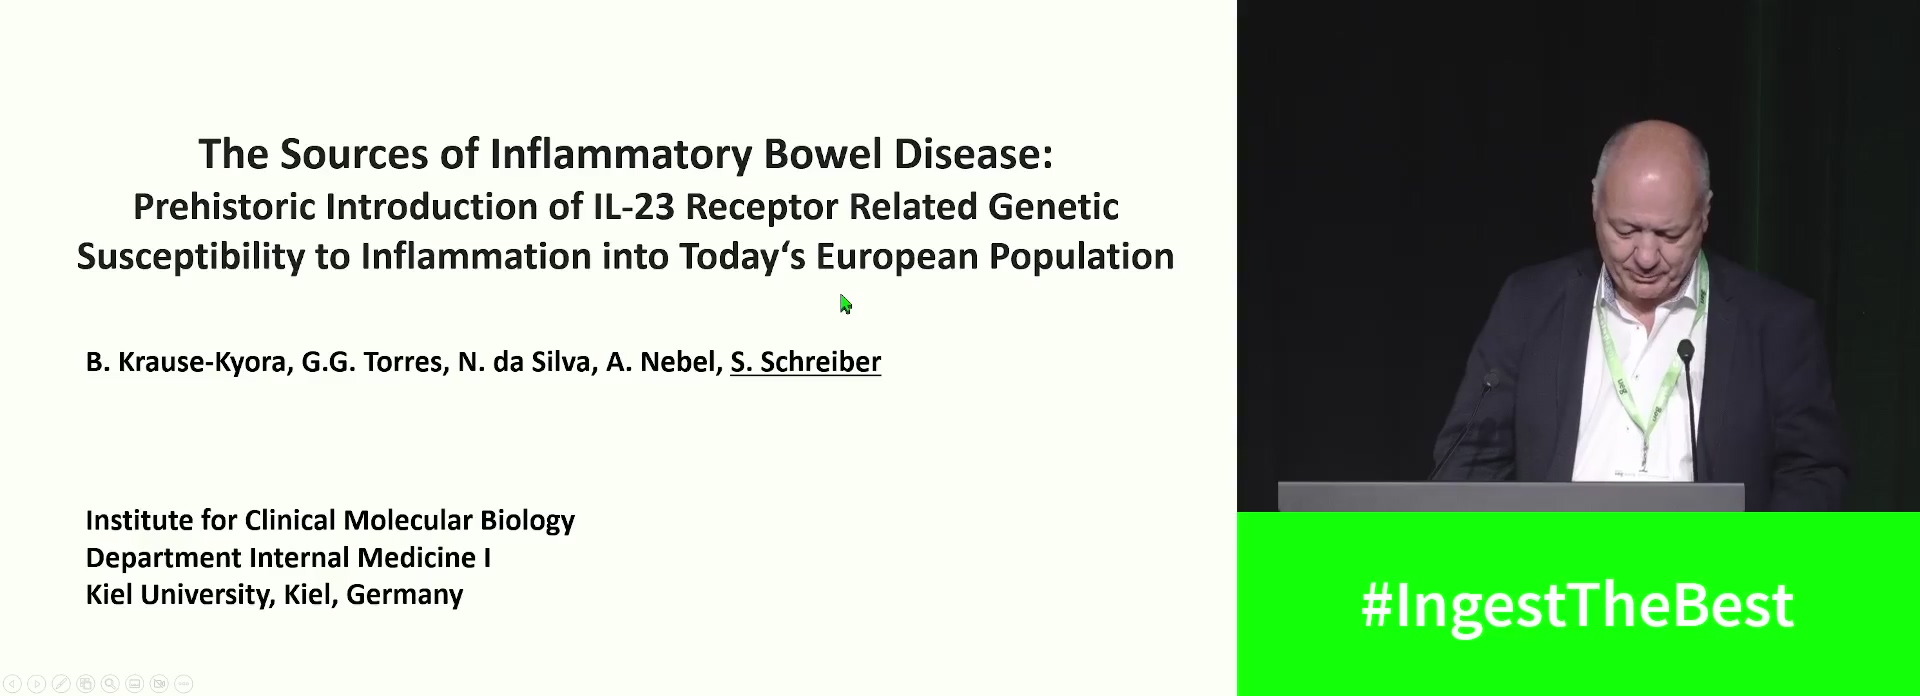 TO THE SOURCES OF INFLAMMATORY BOWEL DISEASE: PRE-HISTORIC INTRODUCTION OF IL-23 RECEPTOR RELATED GENETIC SUSCEPTIBILITY TO INFLAMMATION INTO TODAY'S EUROPEAN POPULATION